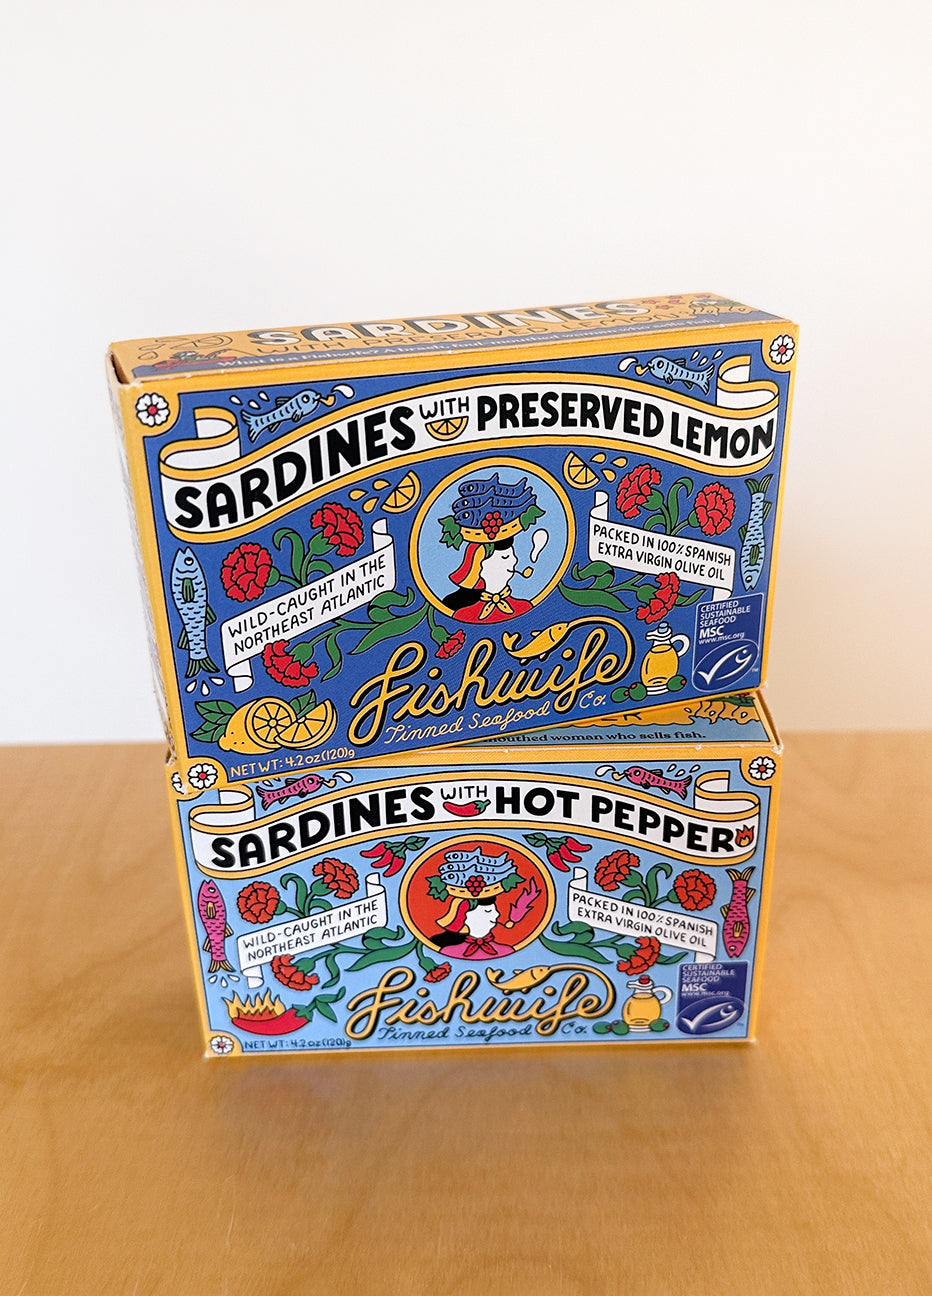 FishWife Sardines with Hot Pepper